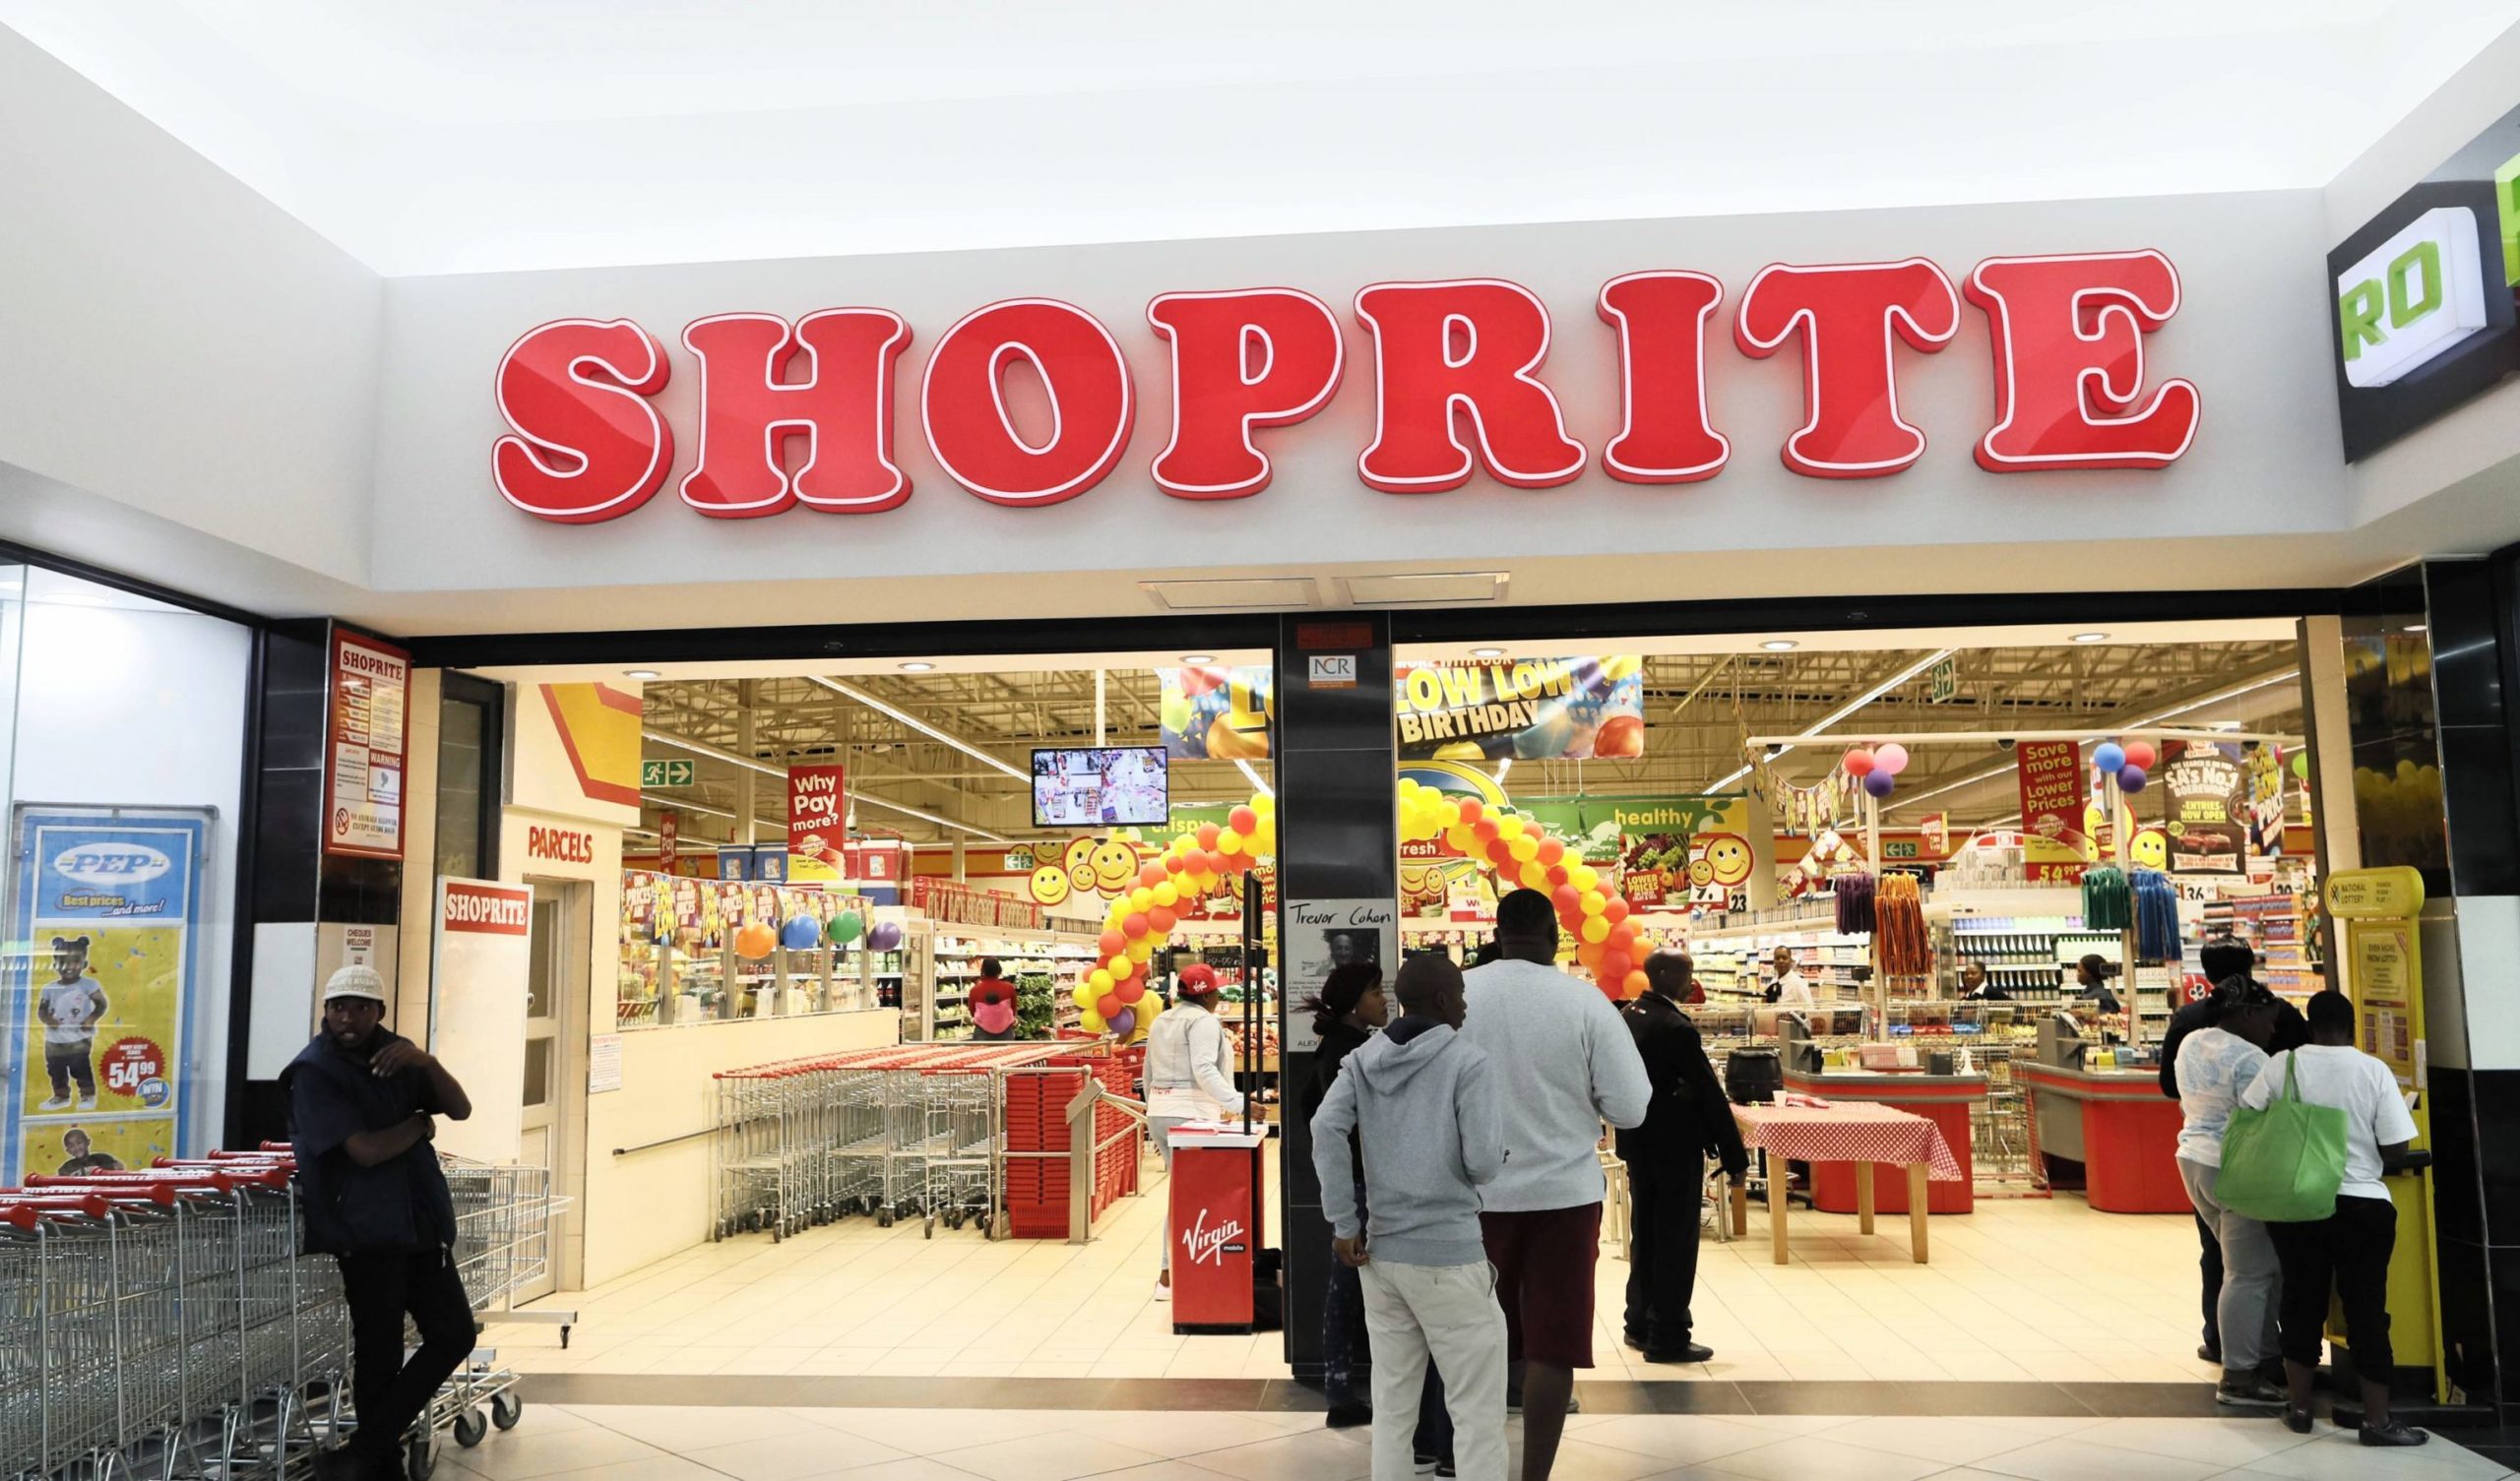 Giant retailer Shoprite plans to exit another African market